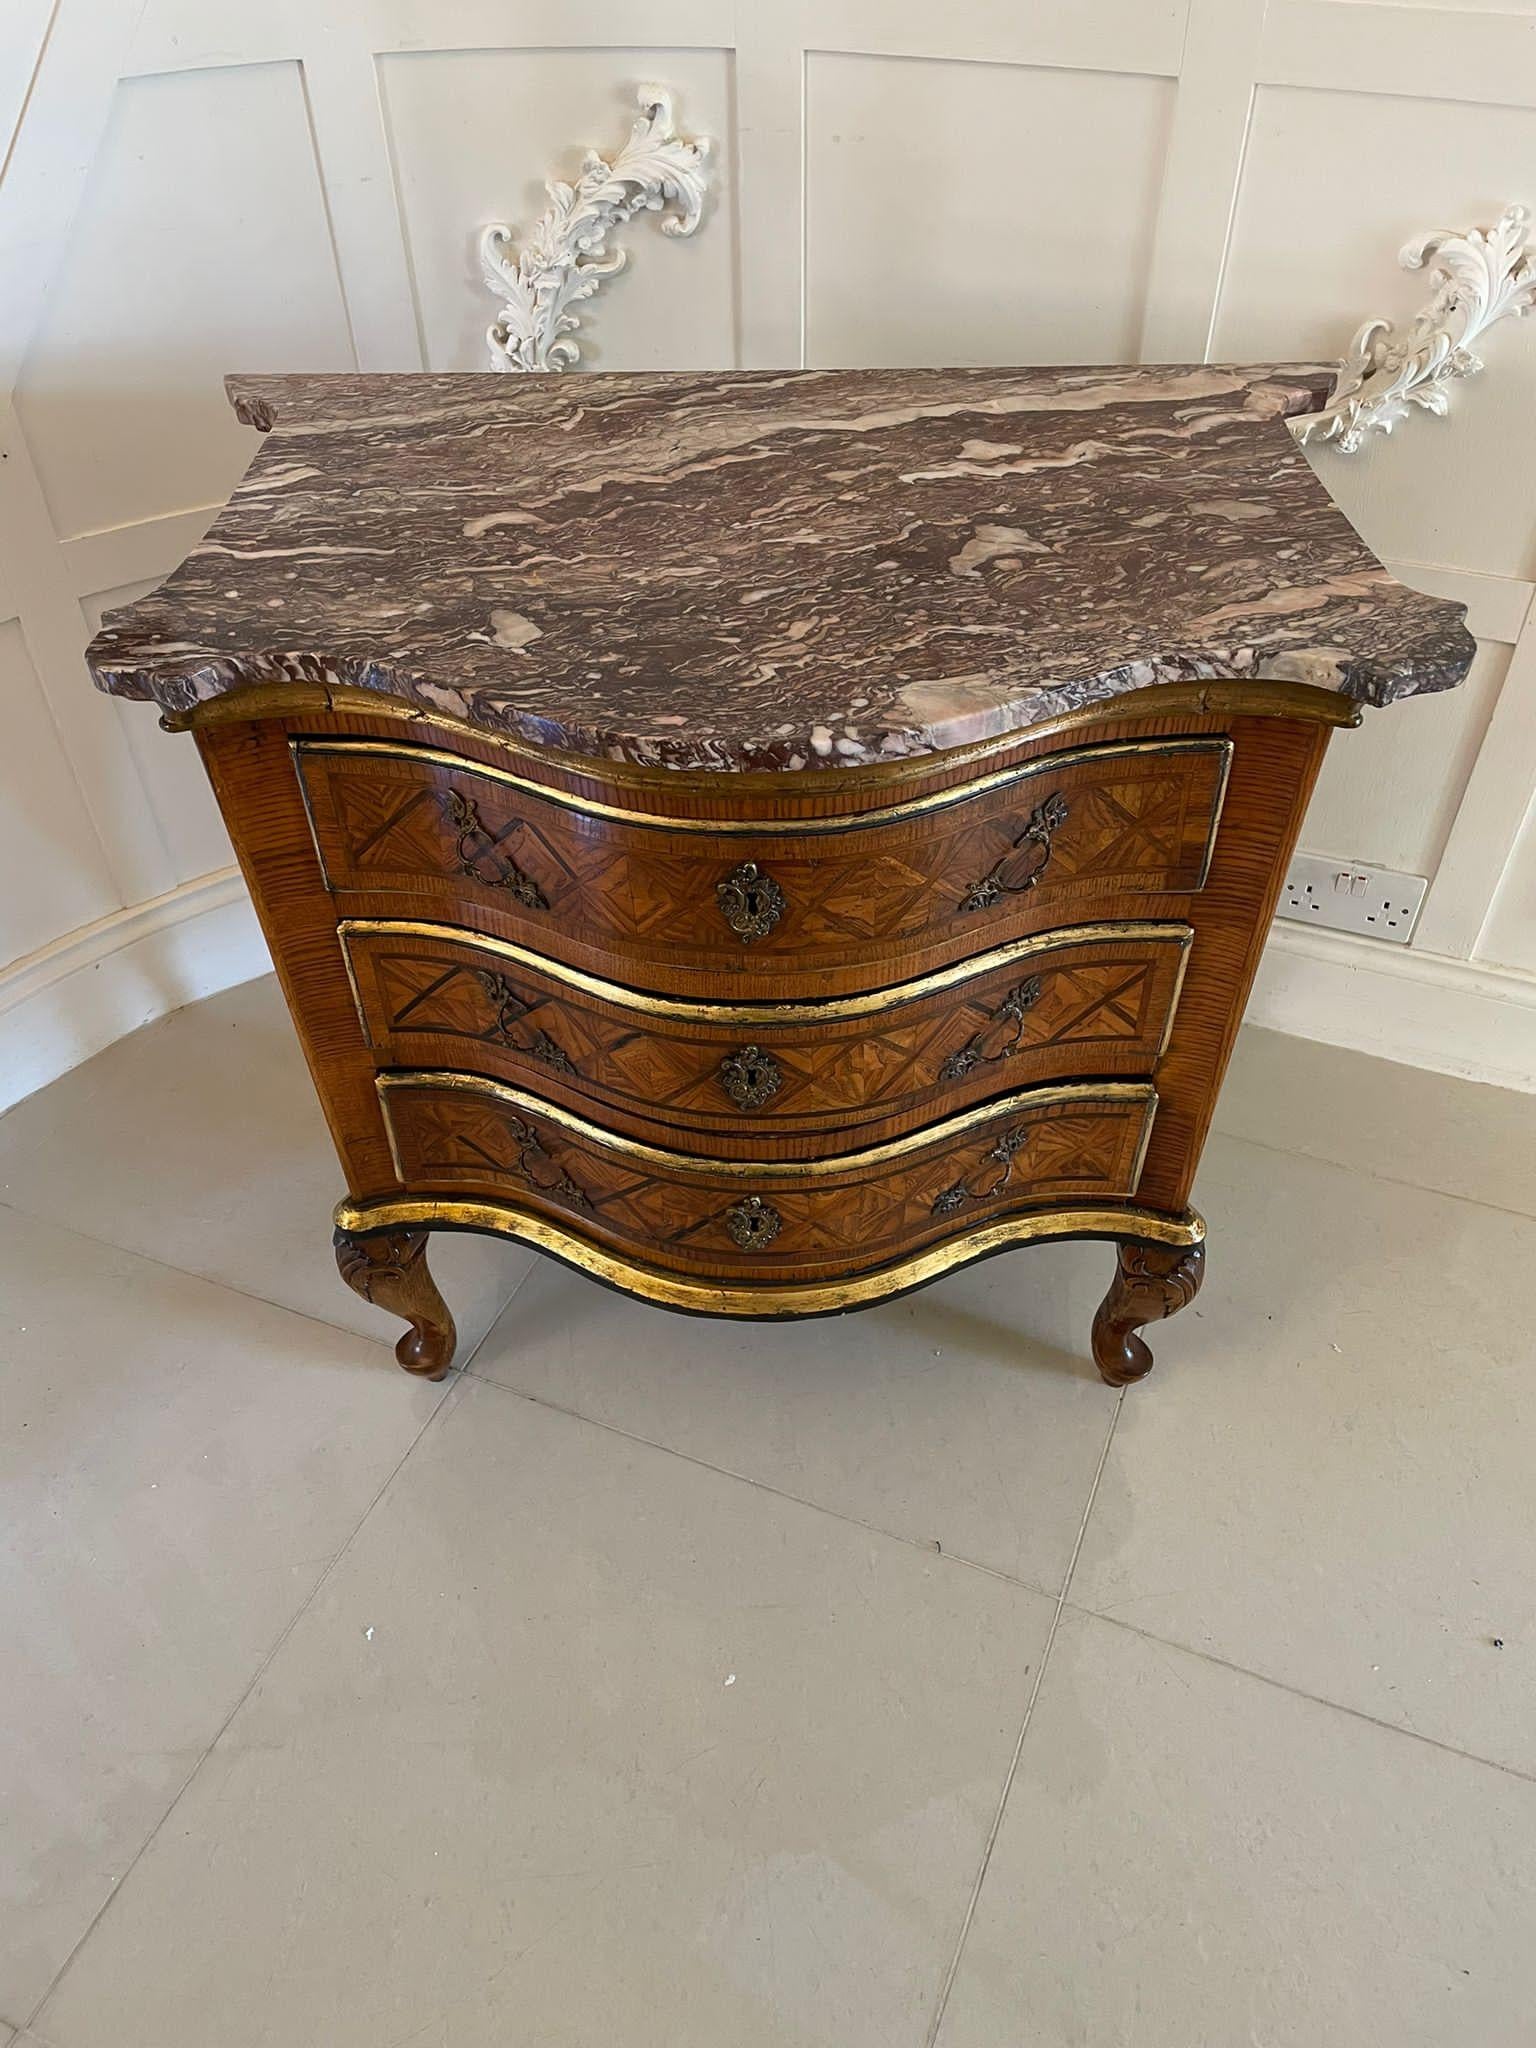 French Antique Quality Parquetry Inlaid Serpentine Shaped Marble Top Commode Chest For Sale